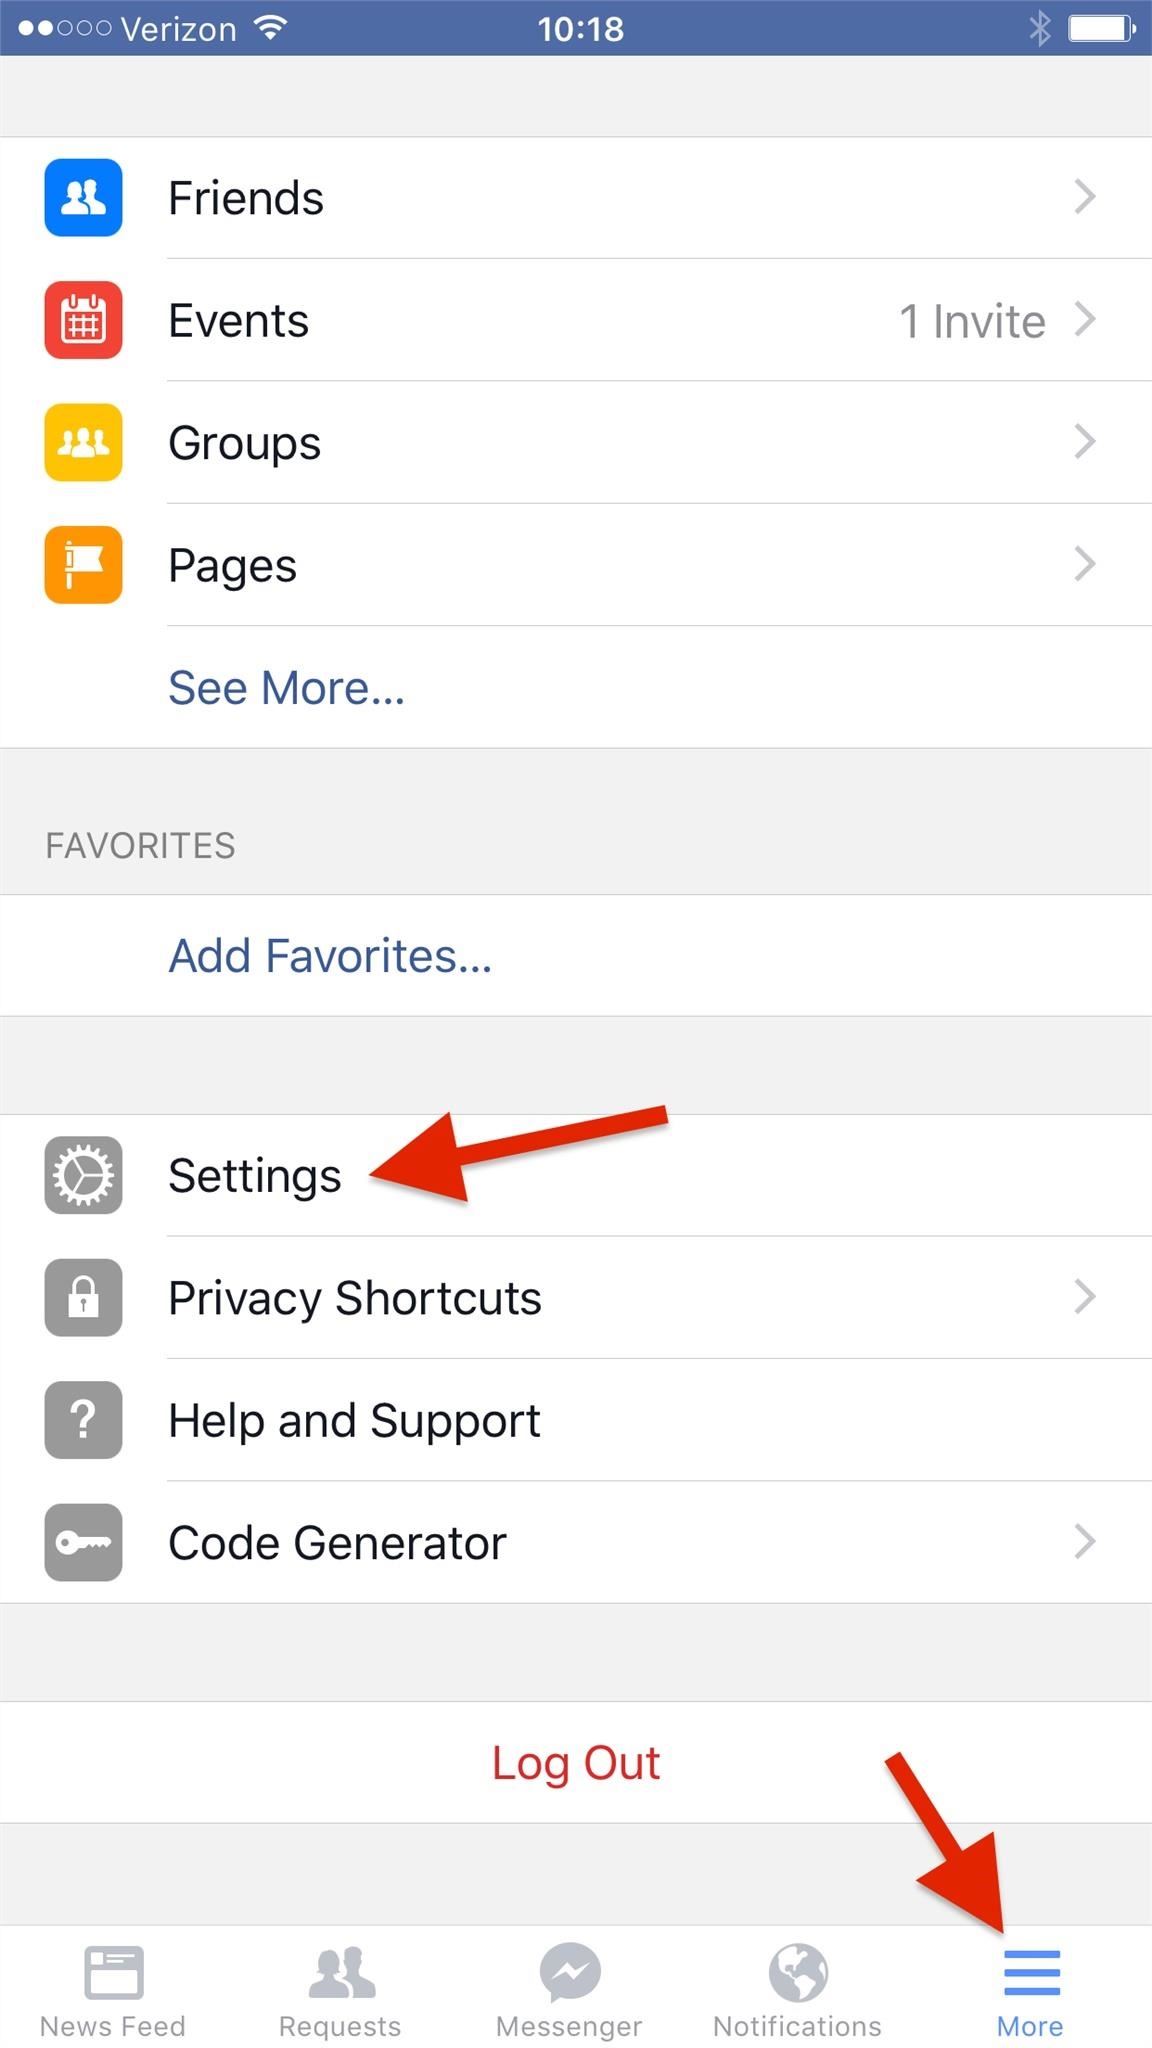 How to Disable Those Annoying Auto-Play Videos on Facebook